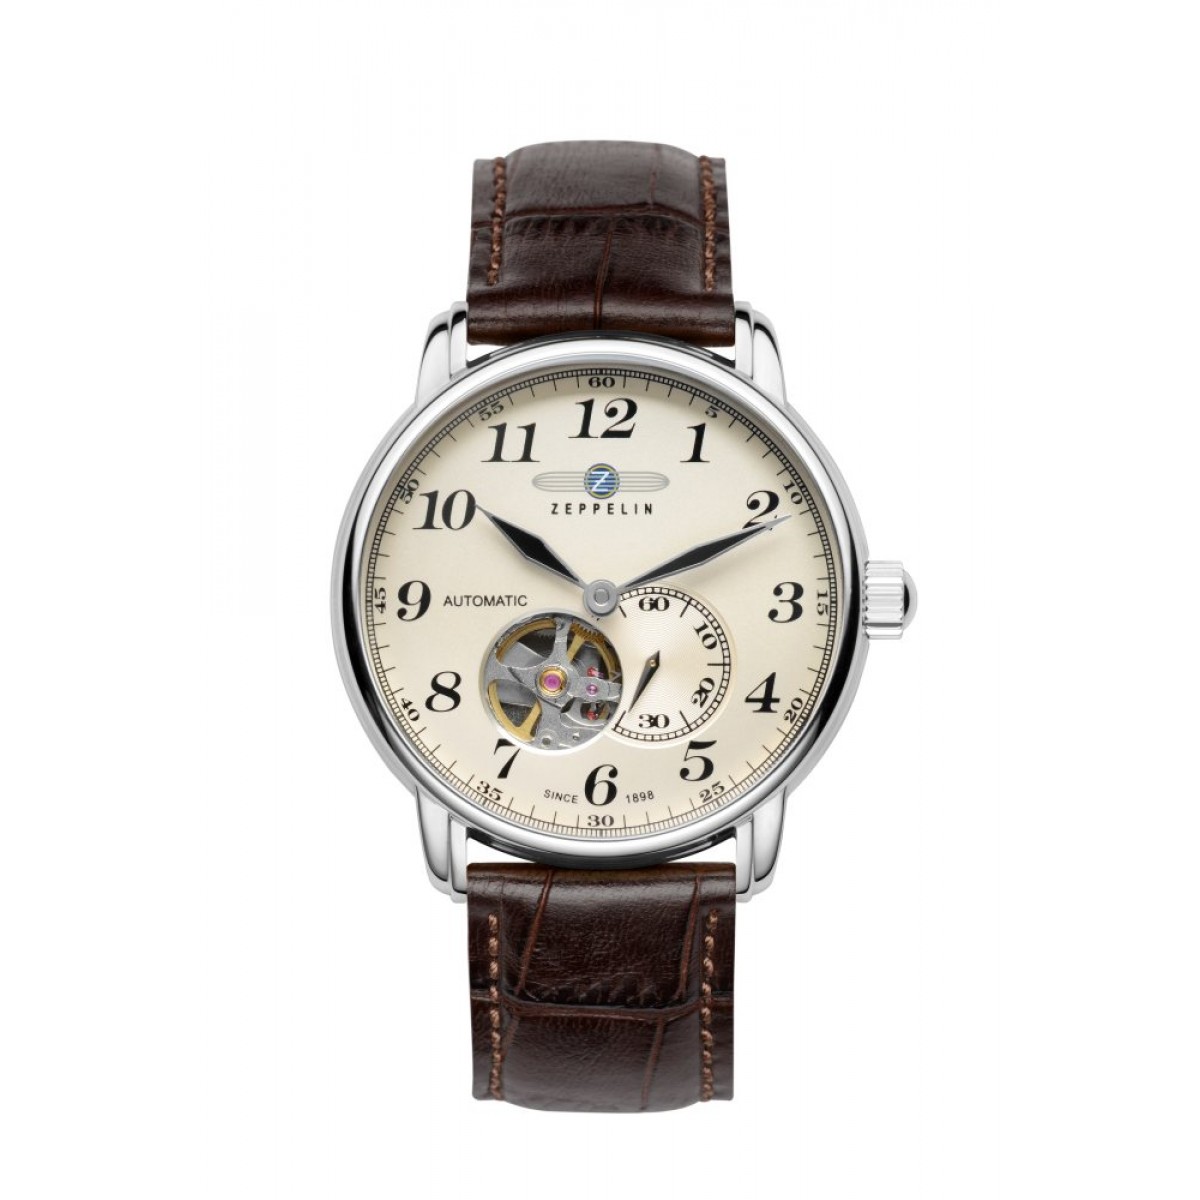 LZ127 Graf Zeppelin Automatic with Open Heart and leather strap